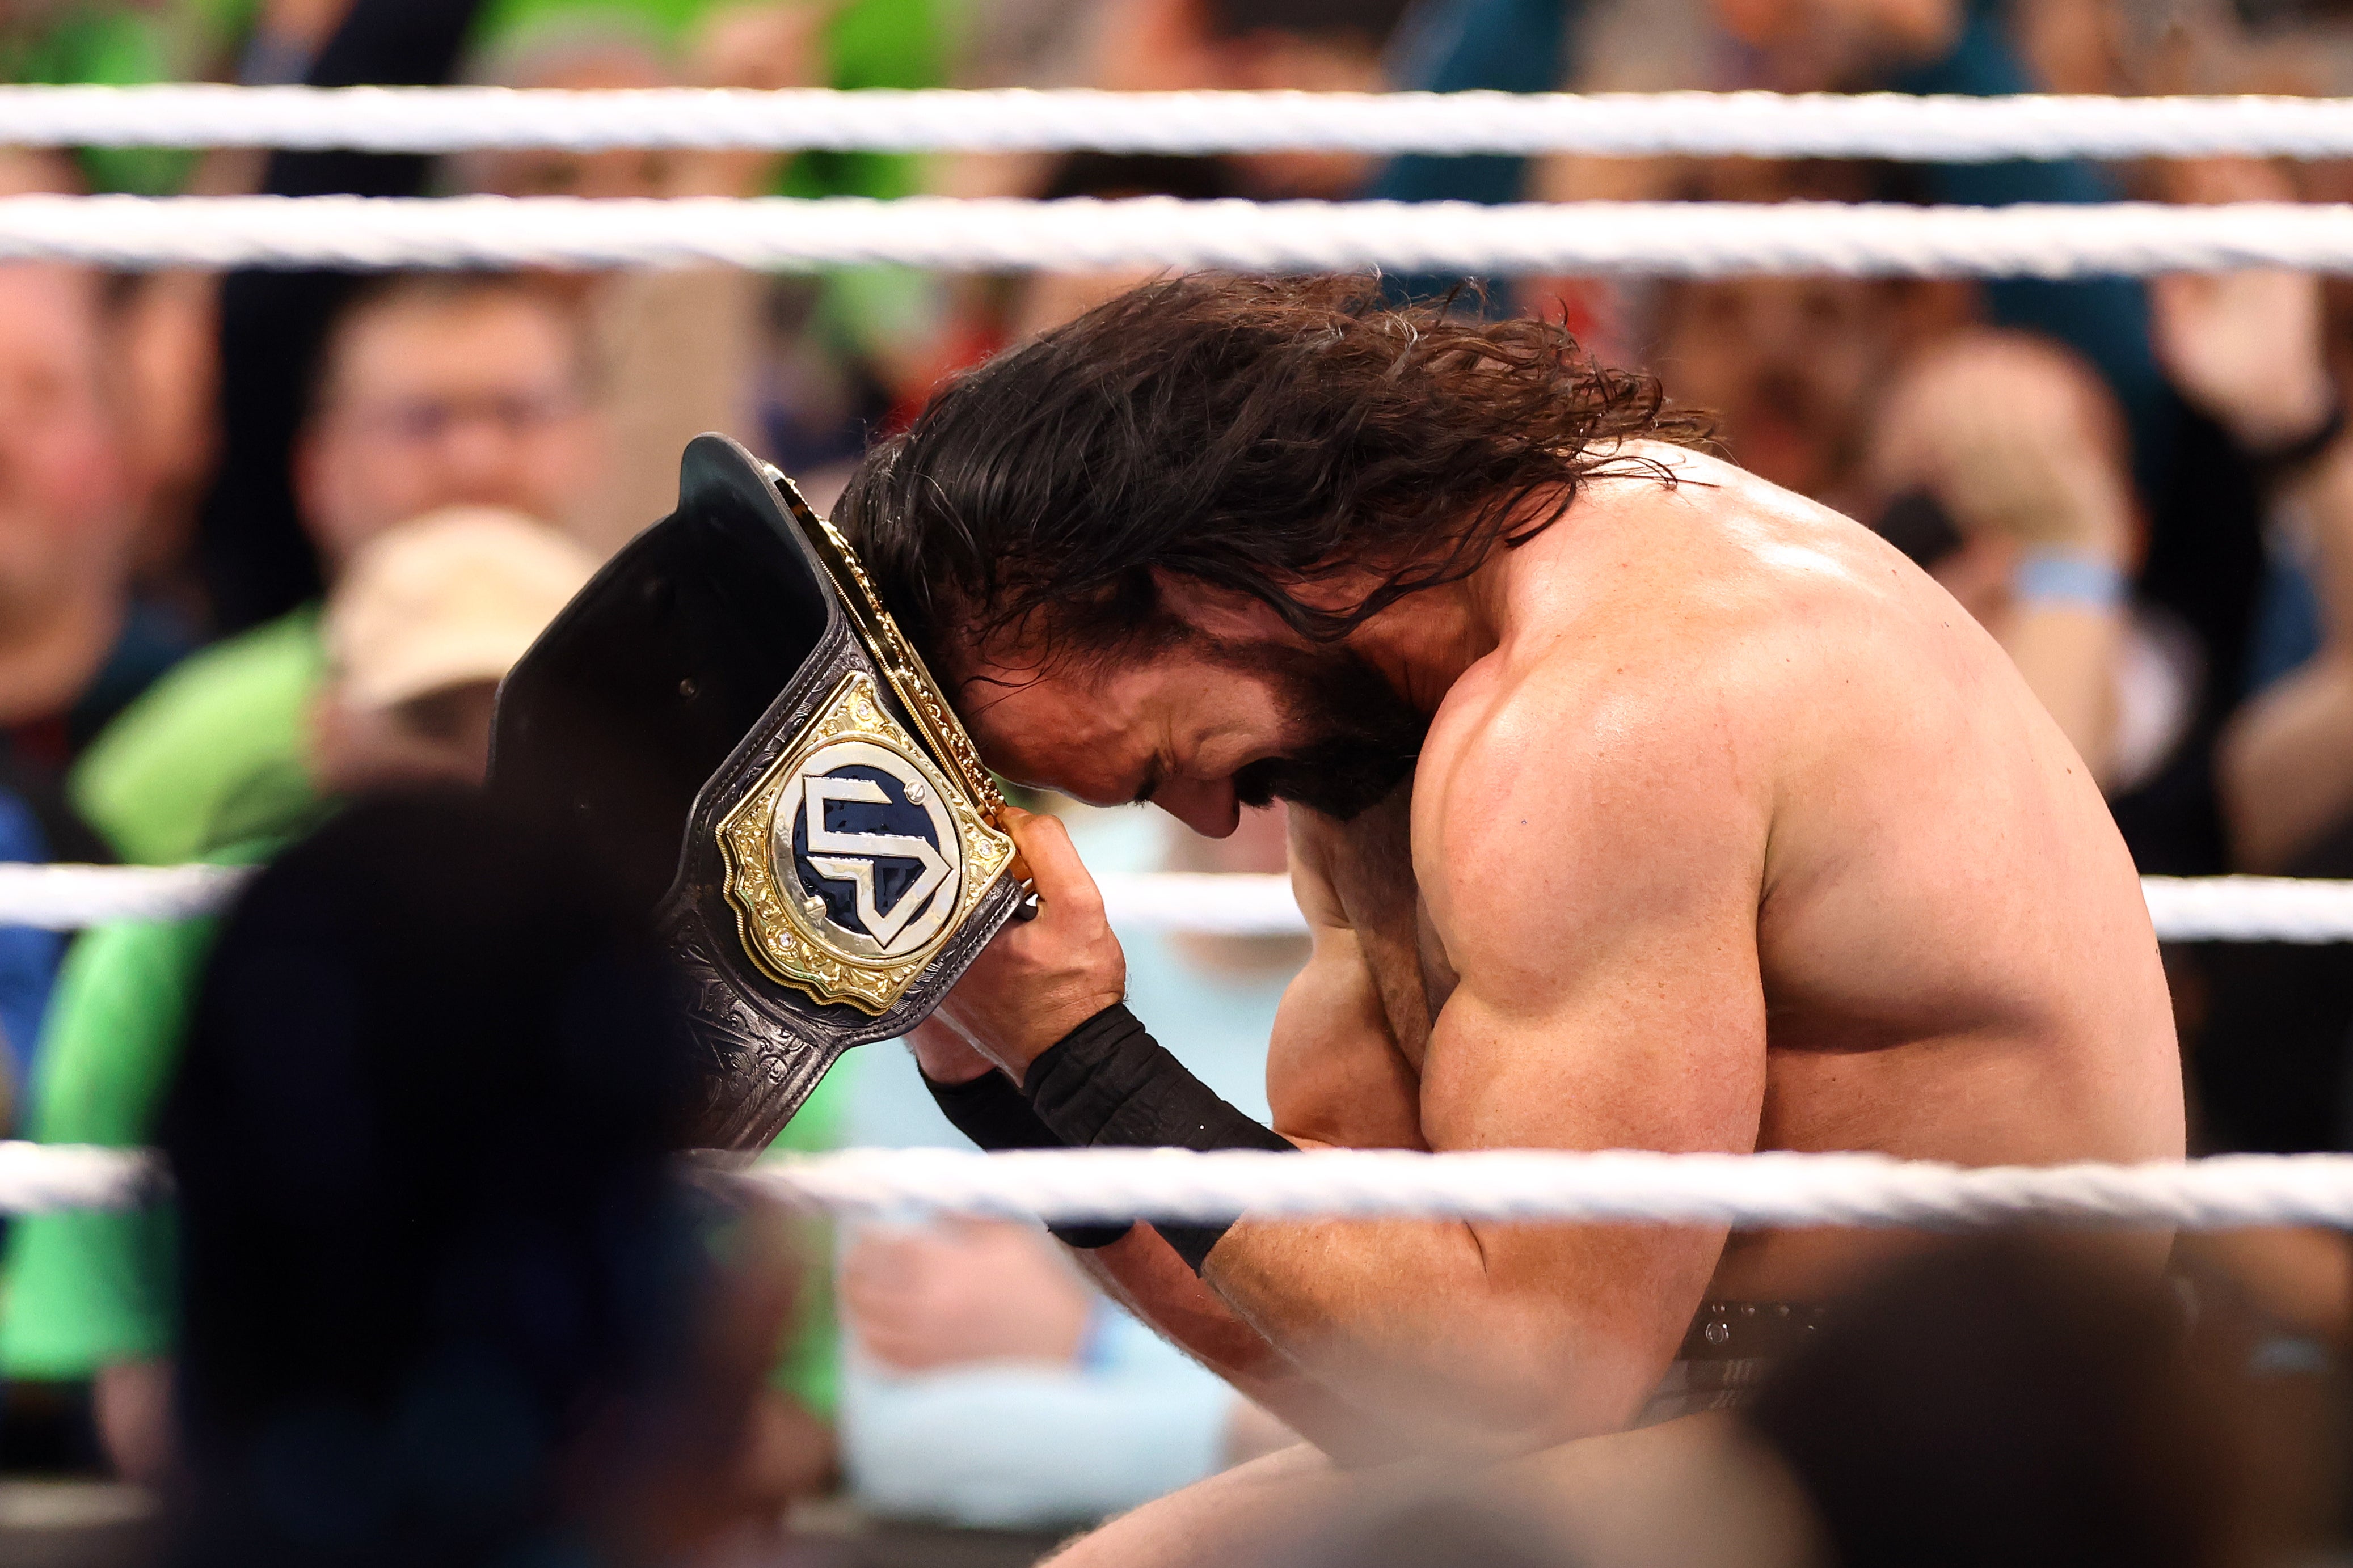 Drew McIntyre’s World Heavyweight Title reign was short lived